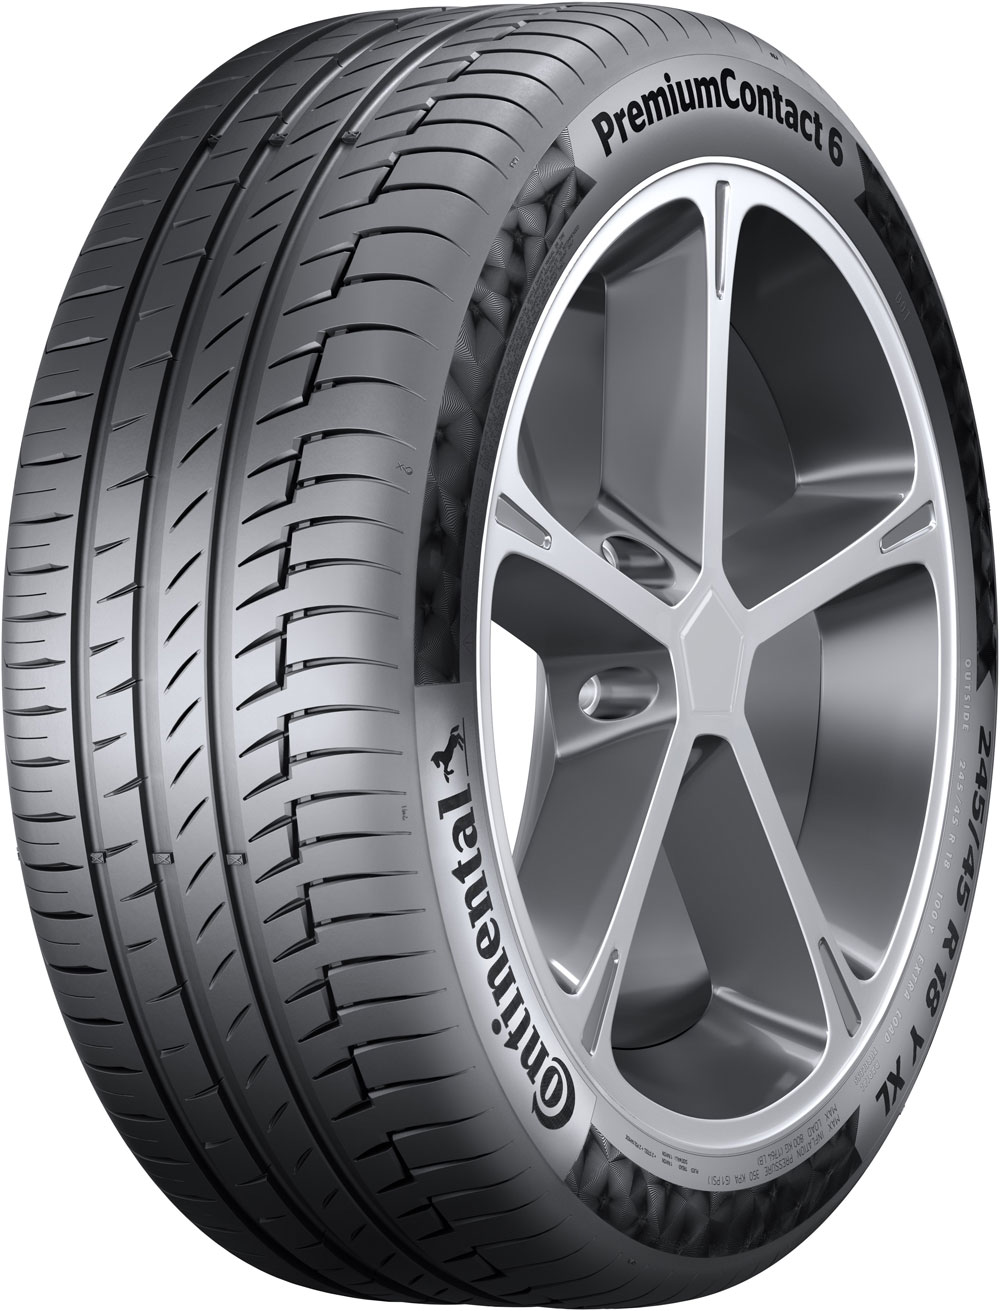 Anvelope auto CONTINENTAL PremiumContact 6 -V XL MERCEDES 245/45 R19 102Y